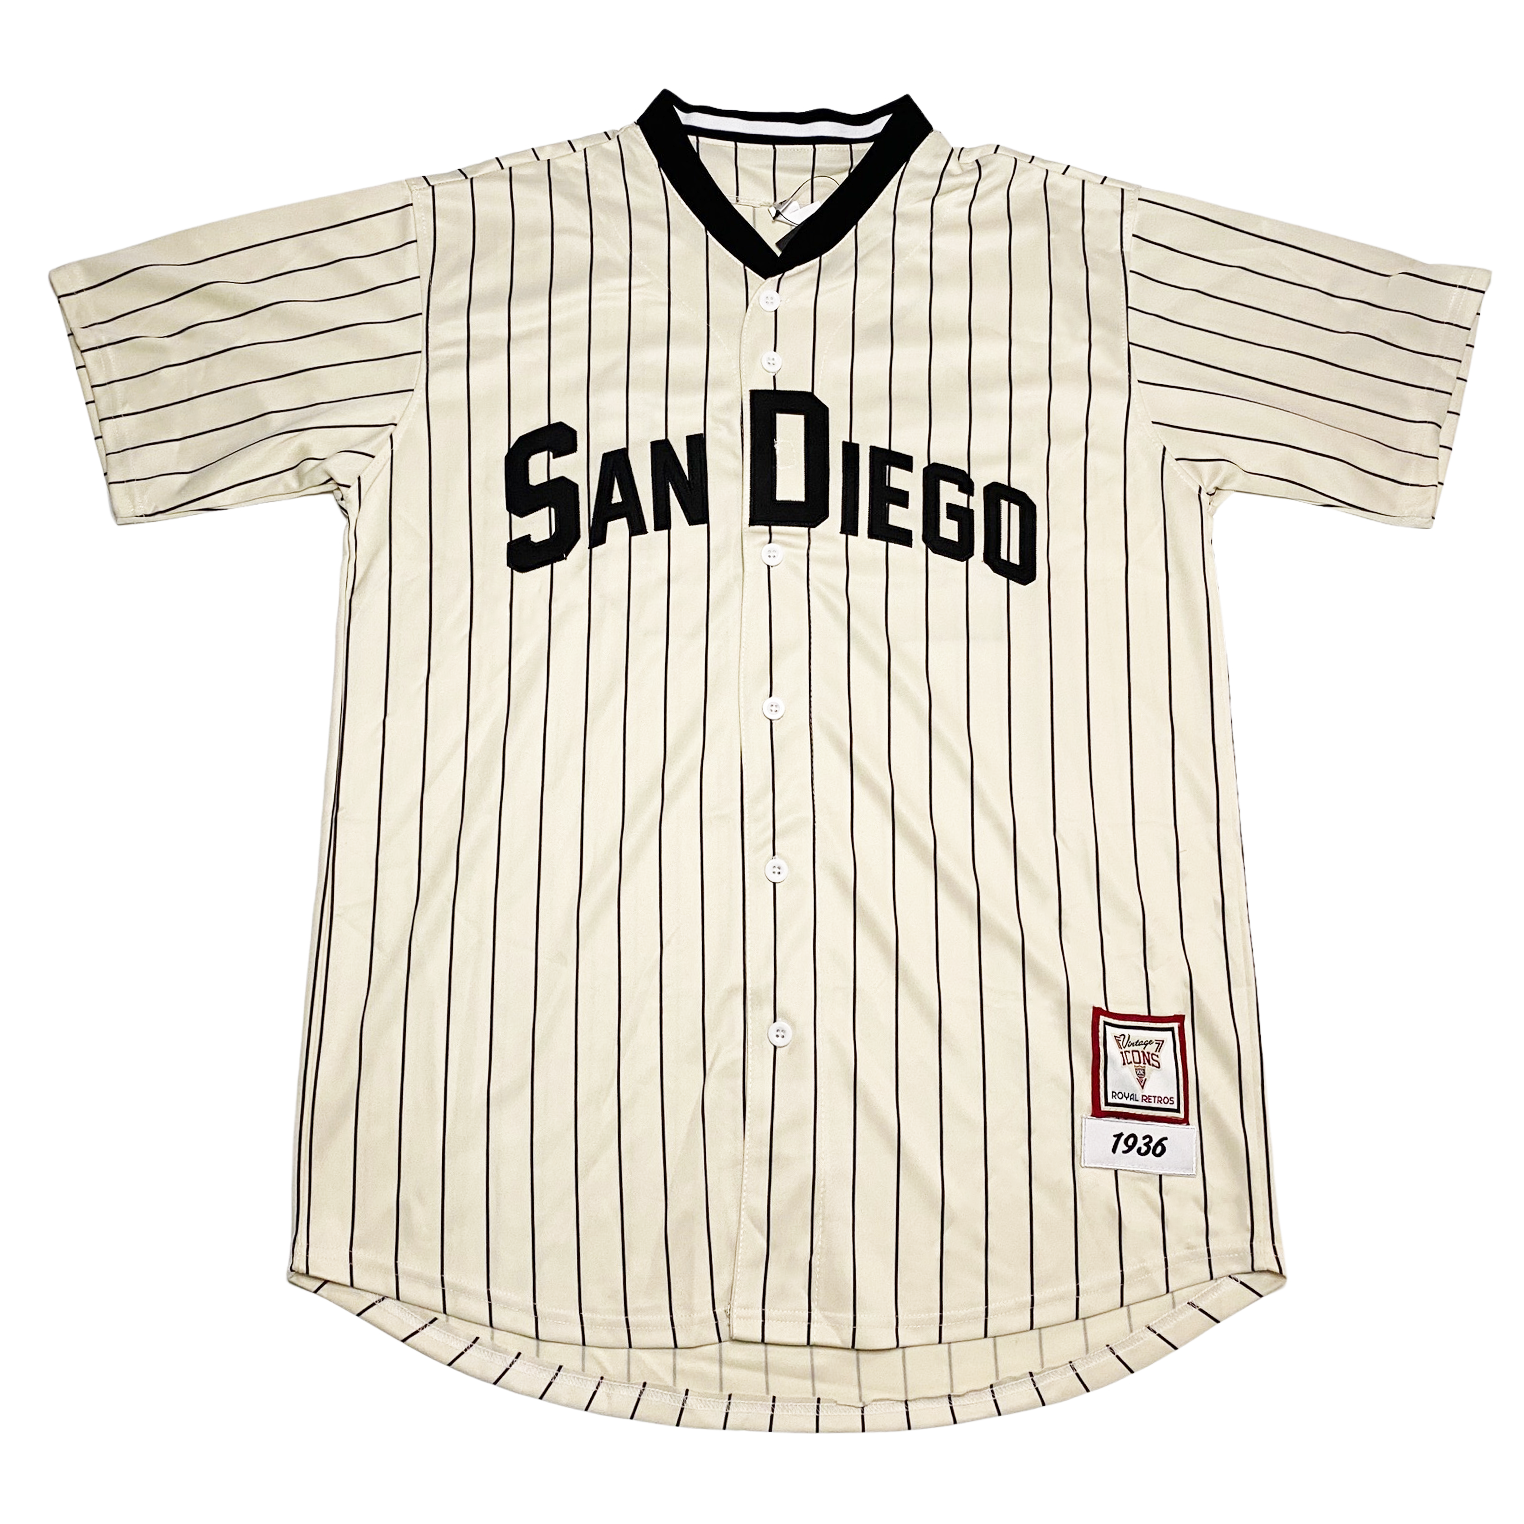 Authentic San Diego Padres Jerseys, Throwback San Diego Padres